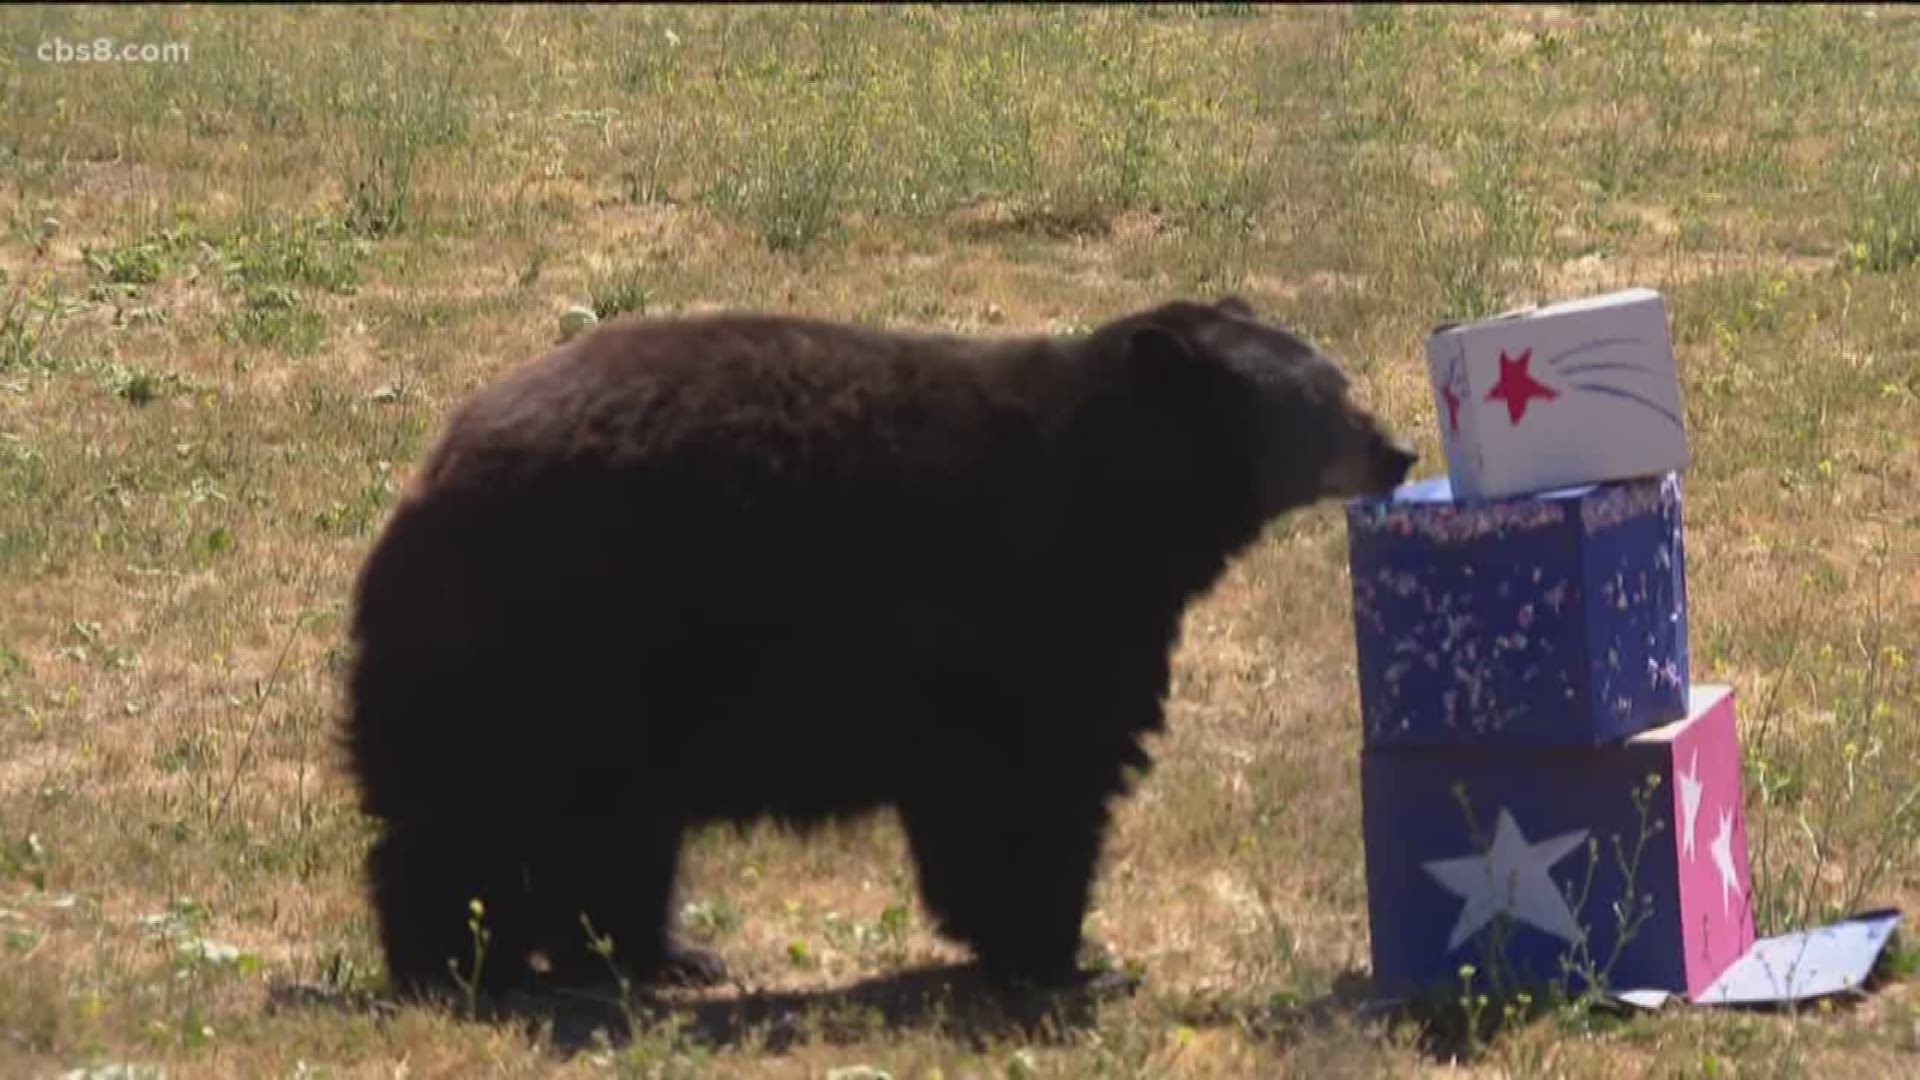 At a special East County birthday party Friday, it was watermelons and red, white and blue. That is because it has been ten years since the Lions, Tigers and Bears Sanctuary rescued Liberty the bear.